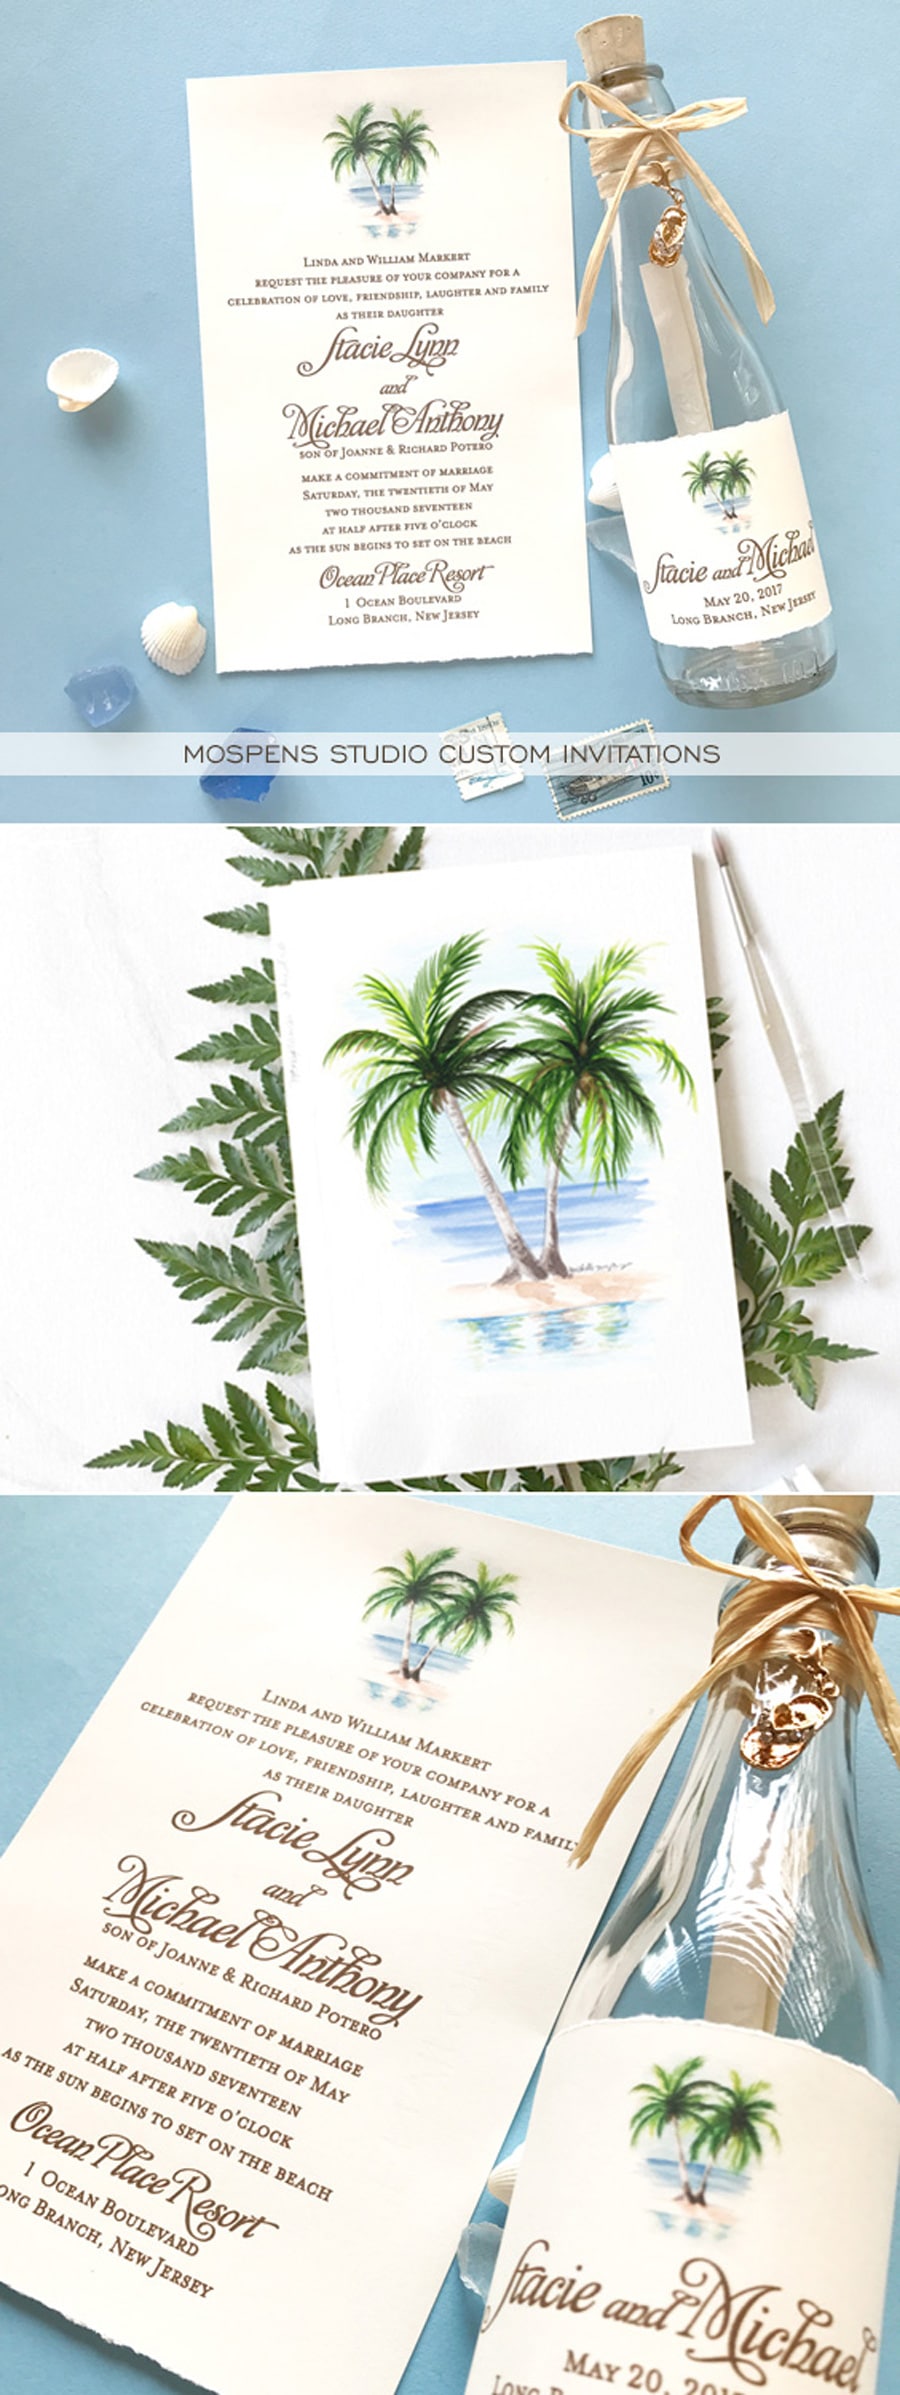 Tropical chic bottle invitations perfect for destination beach and seaside weddings. Each design first begins with Michelle Mospens original watercolor illustration. A fun and tropical beach chic way to invite your guests!